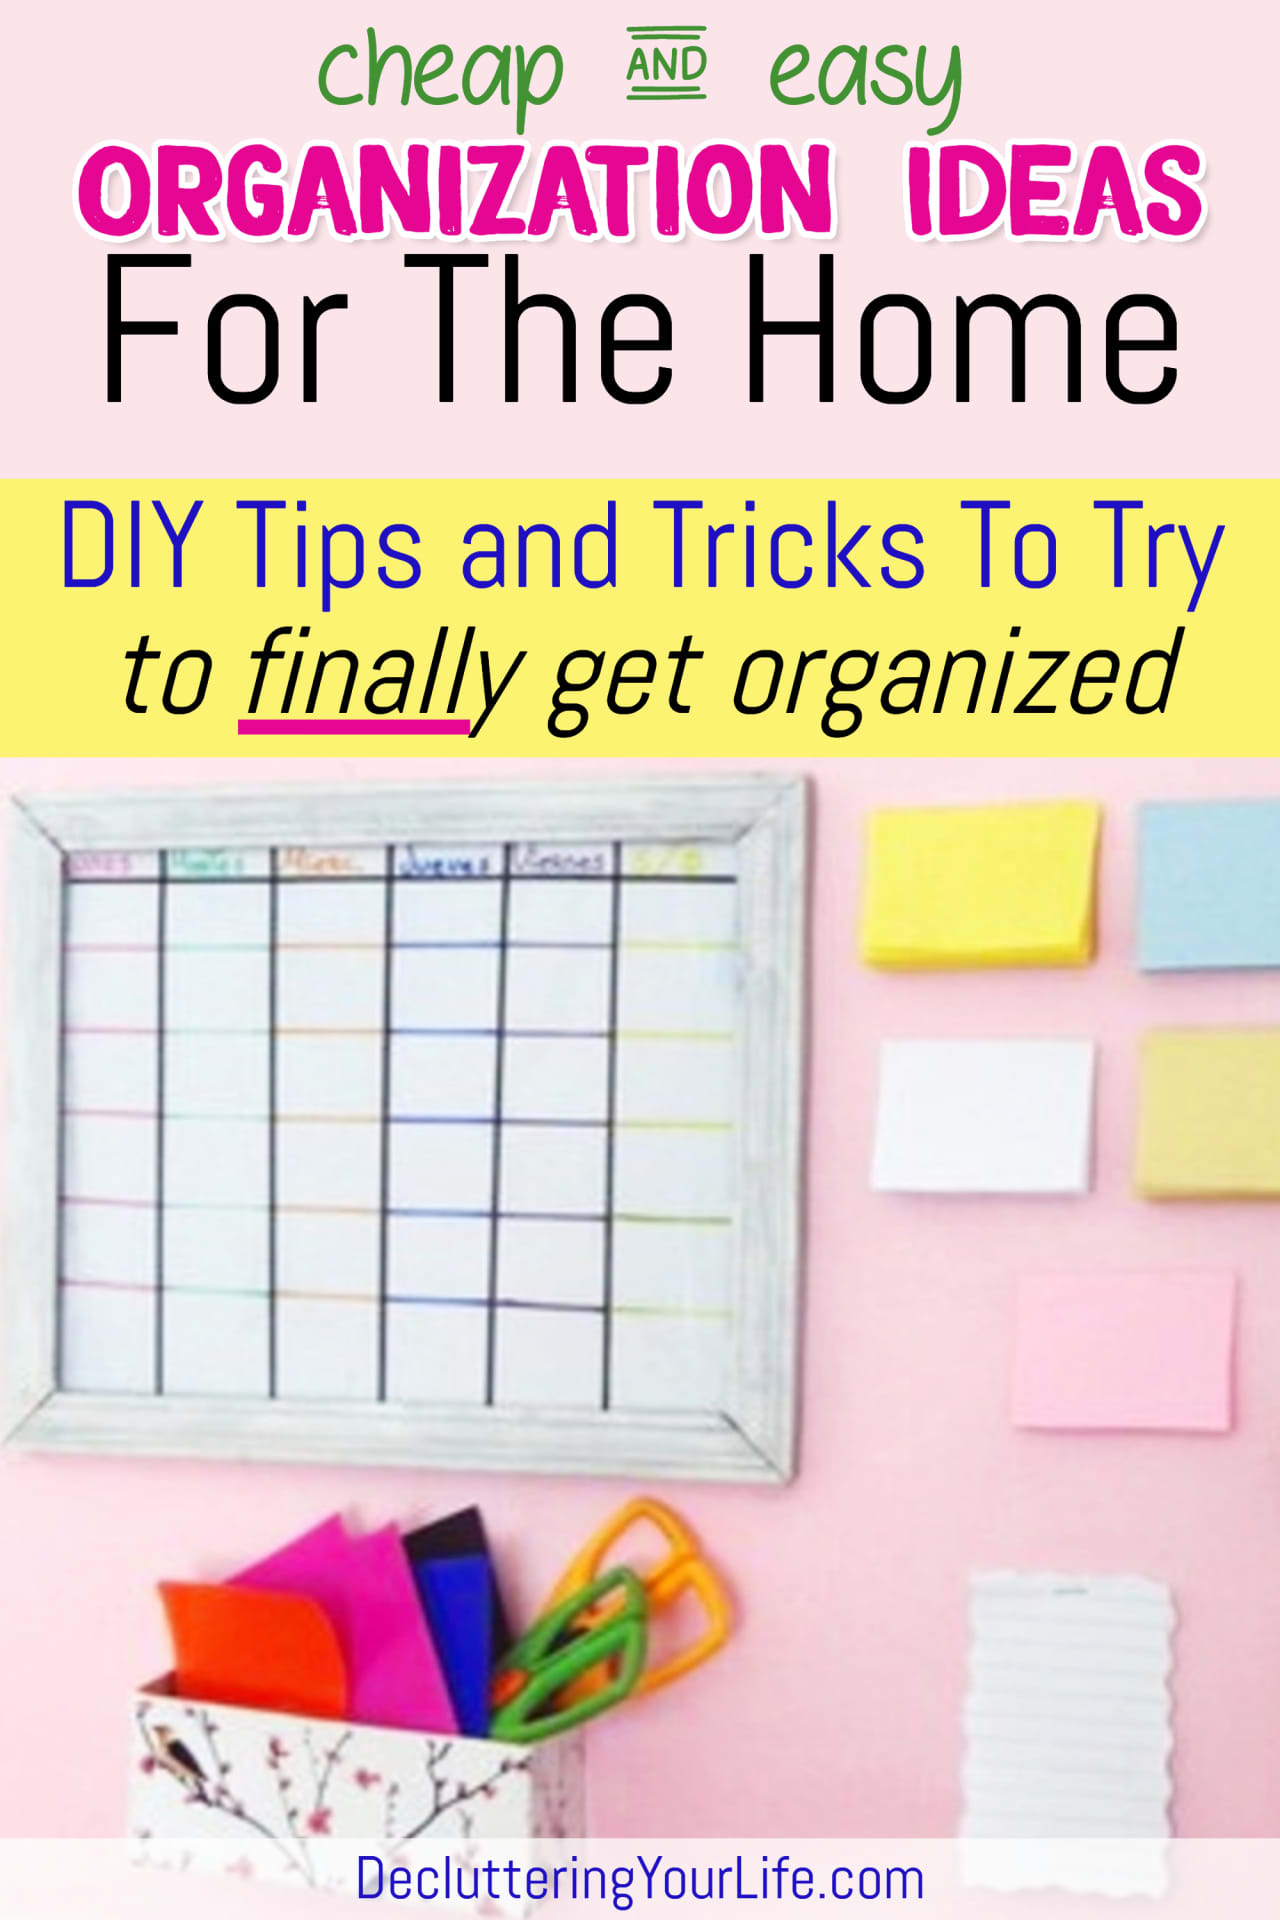 Cheap & Easy Organization Ideas for the Home DIY Tips, Tricks and Organization HACKS to try to finally GET organized and STAY organized (even if you're on a budget).  Trying to organize clutter and have TOO MUCH STUFF - but don't have the budget to BUY storage and organizers?  Try these budget-friendly home organizing DIY projects and cheap Dollar Store organizing hacks - fun, easy and they WORK!